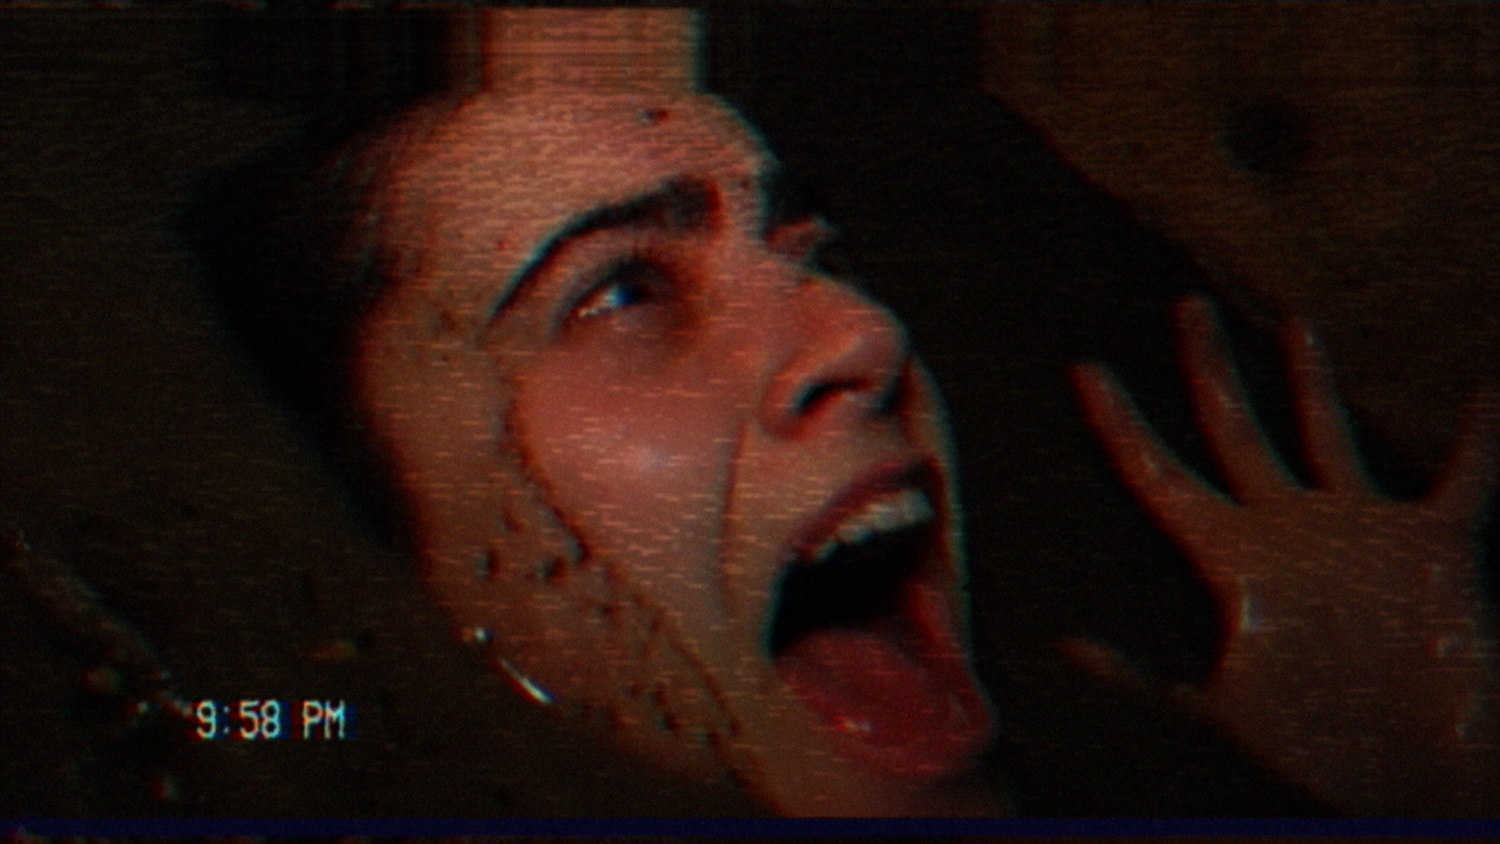 A young woman screams with blood on her face in a shot from the Shudder horror film 'V/H/S/99'